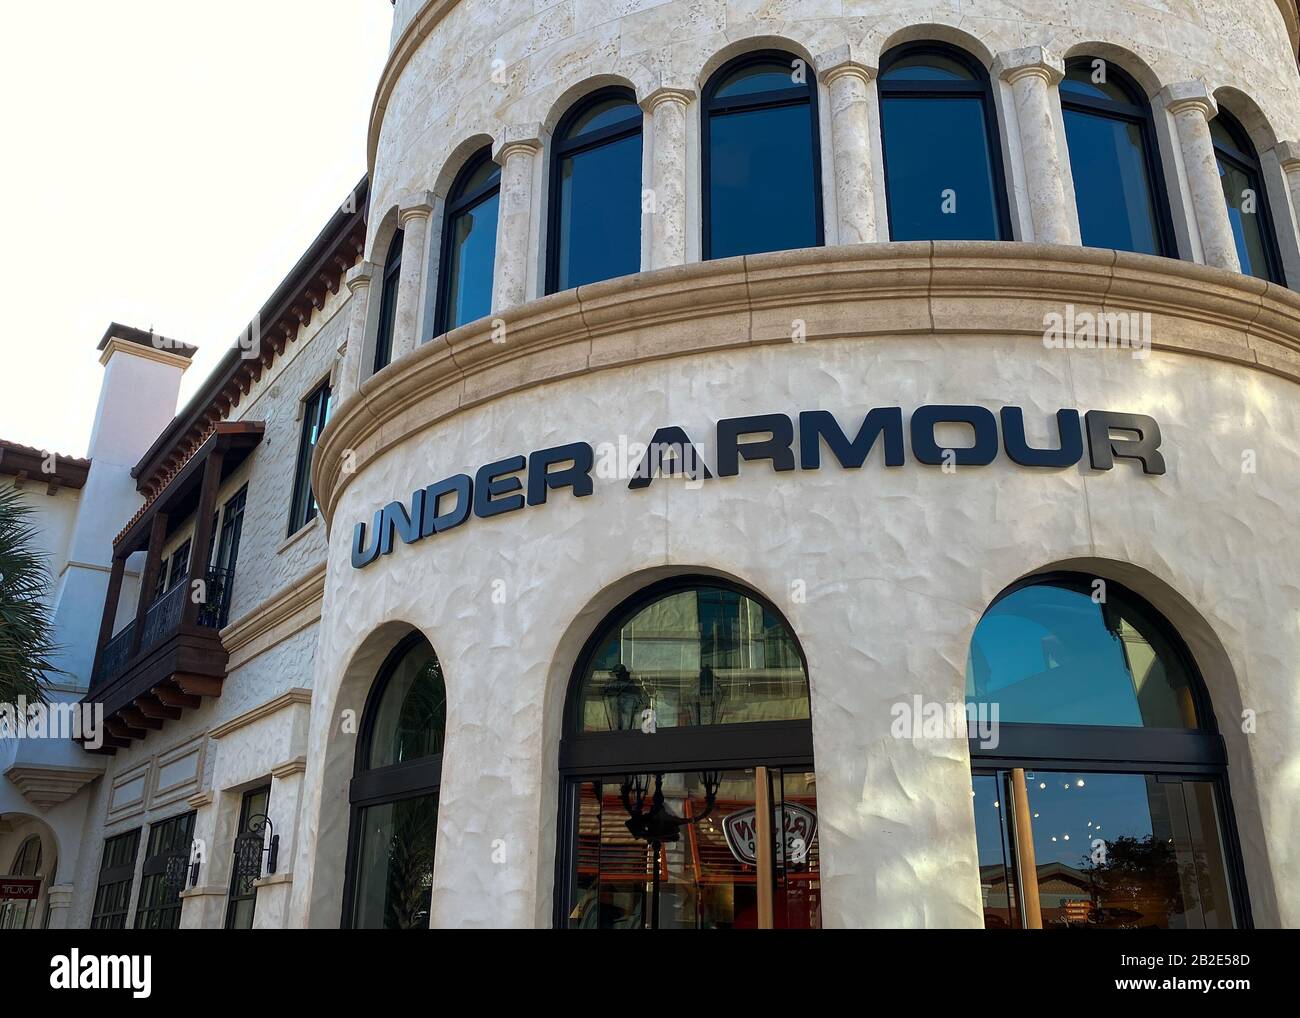 Orlando,FL/USA-2/13/20: Under Armour clothing store at an mall. Under Armour, Inc. is an American that manufactures footwear, sport Stock Photo - Alamy